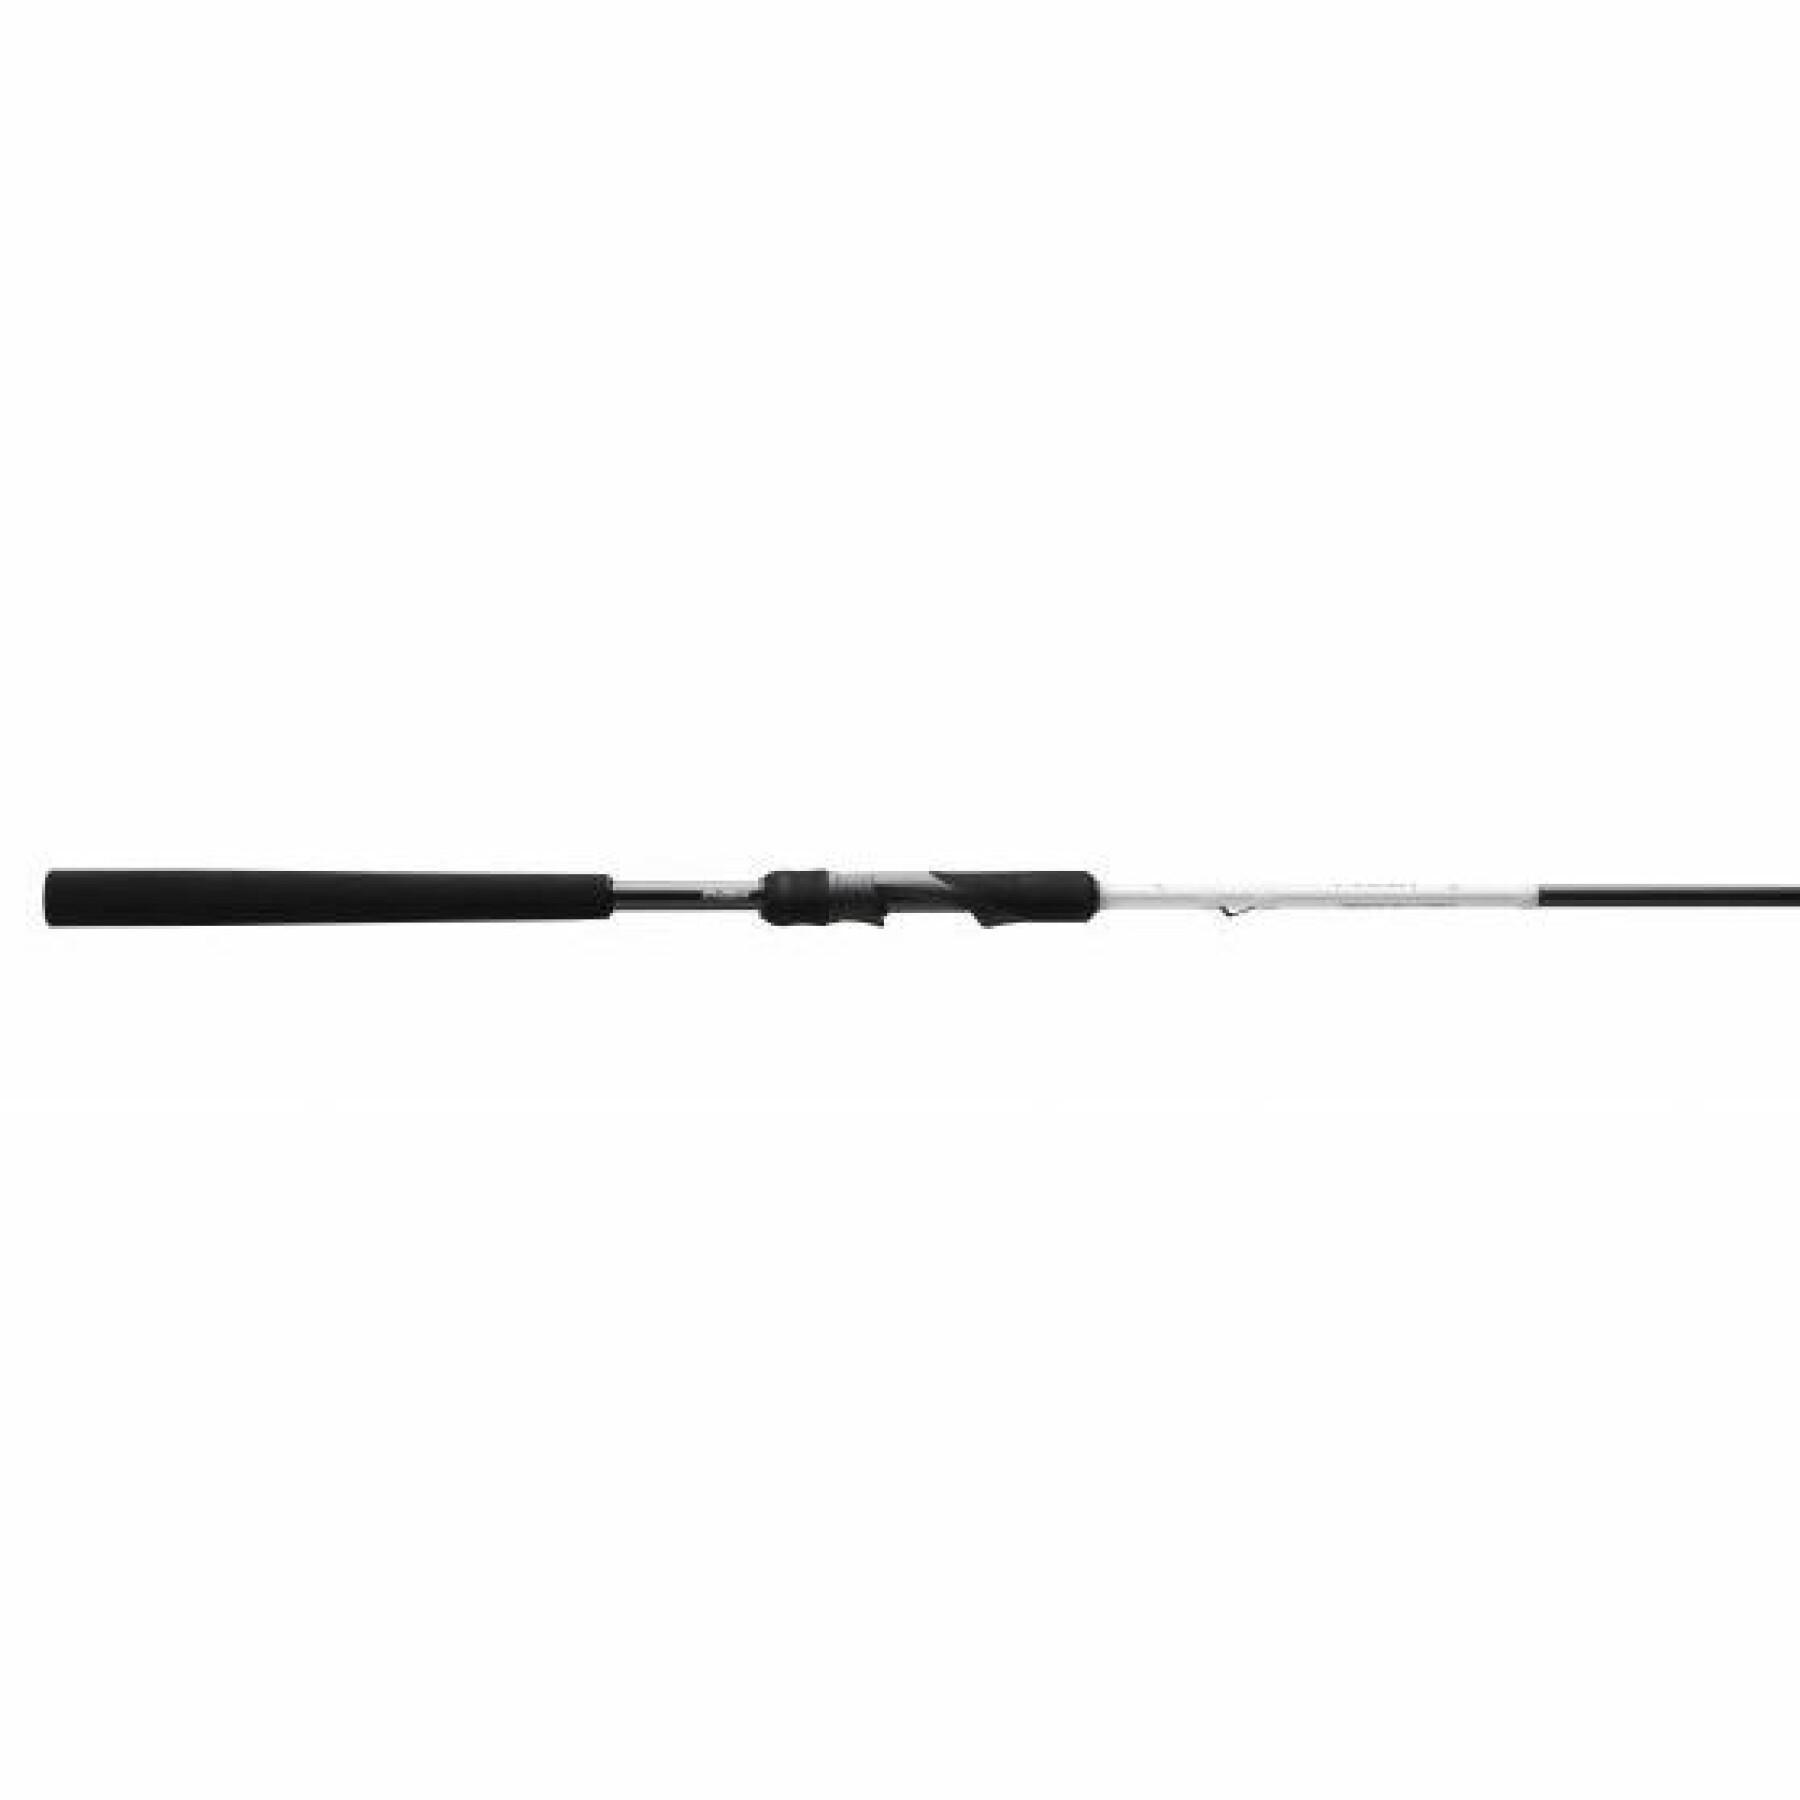 Trzcina 13 Fishing Rely S Spin 2,49m 15-40g